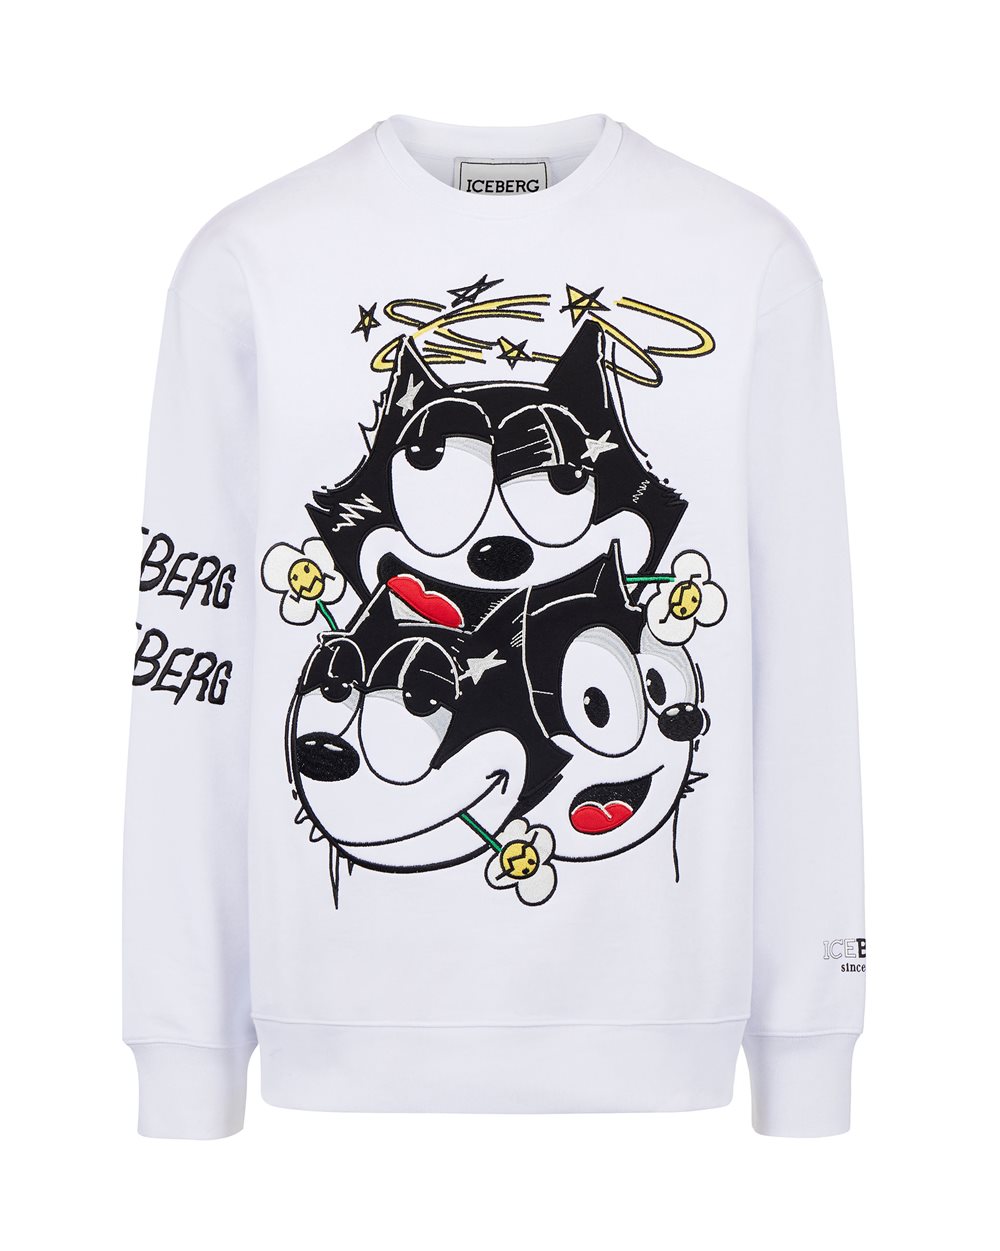 Sweatshirt with cartoon graphics and logo - VAMEE SELECTION | Iceberg - Official Website